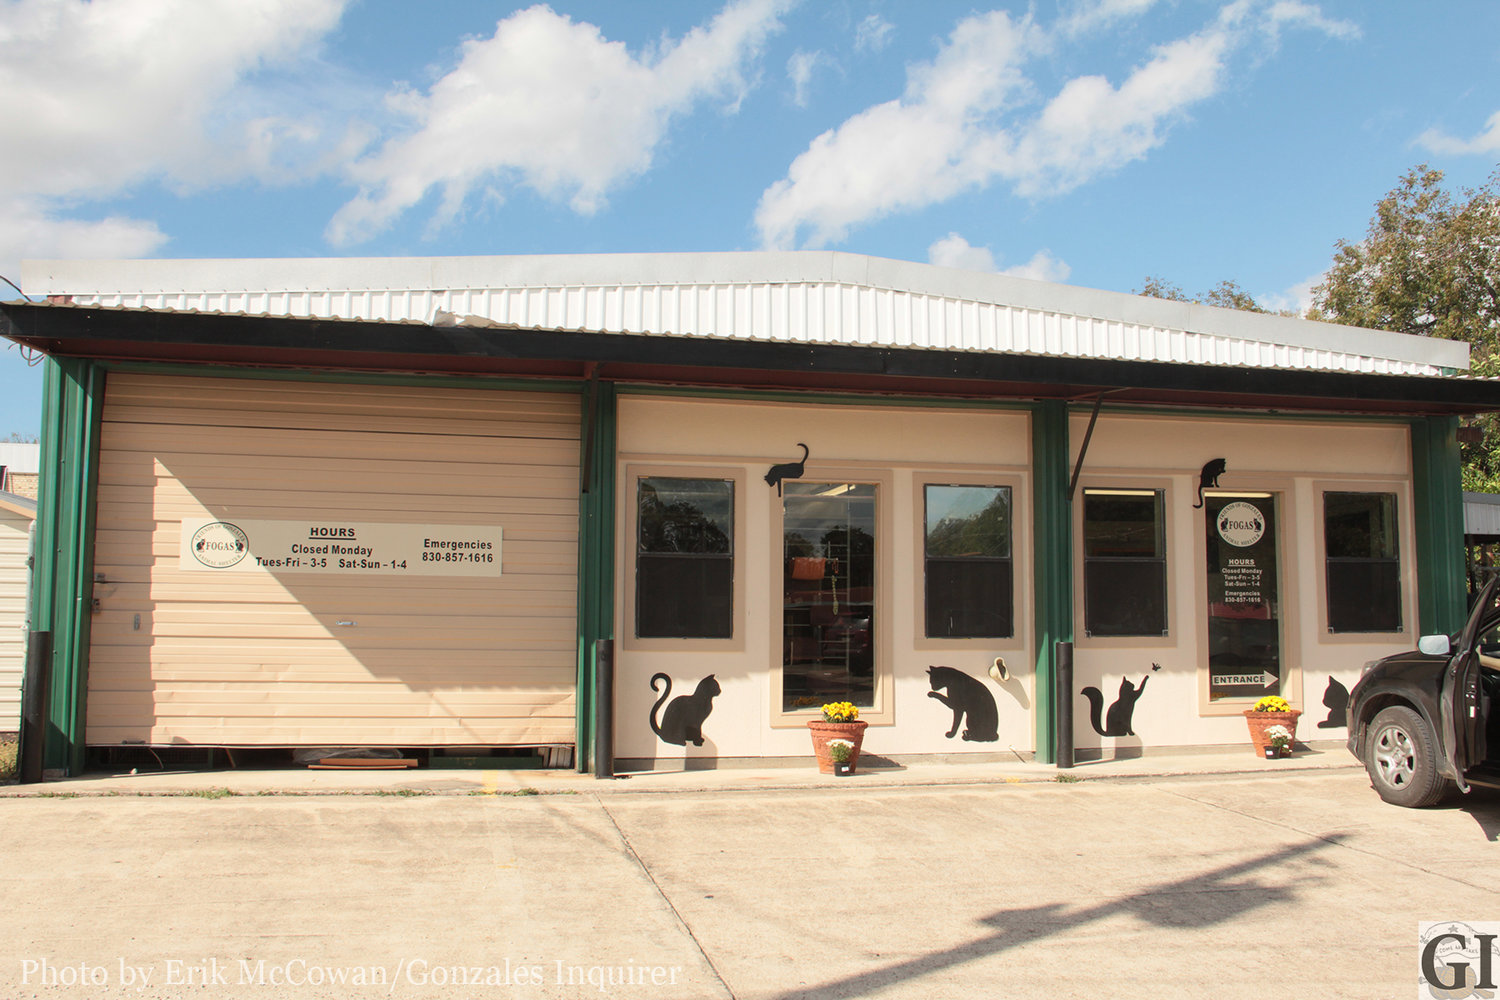 The Friends of Gonzales Animal Shelter has received some needed improvements thanks to generous volunteers, such as a new paint and signage to make the place more noticeable.